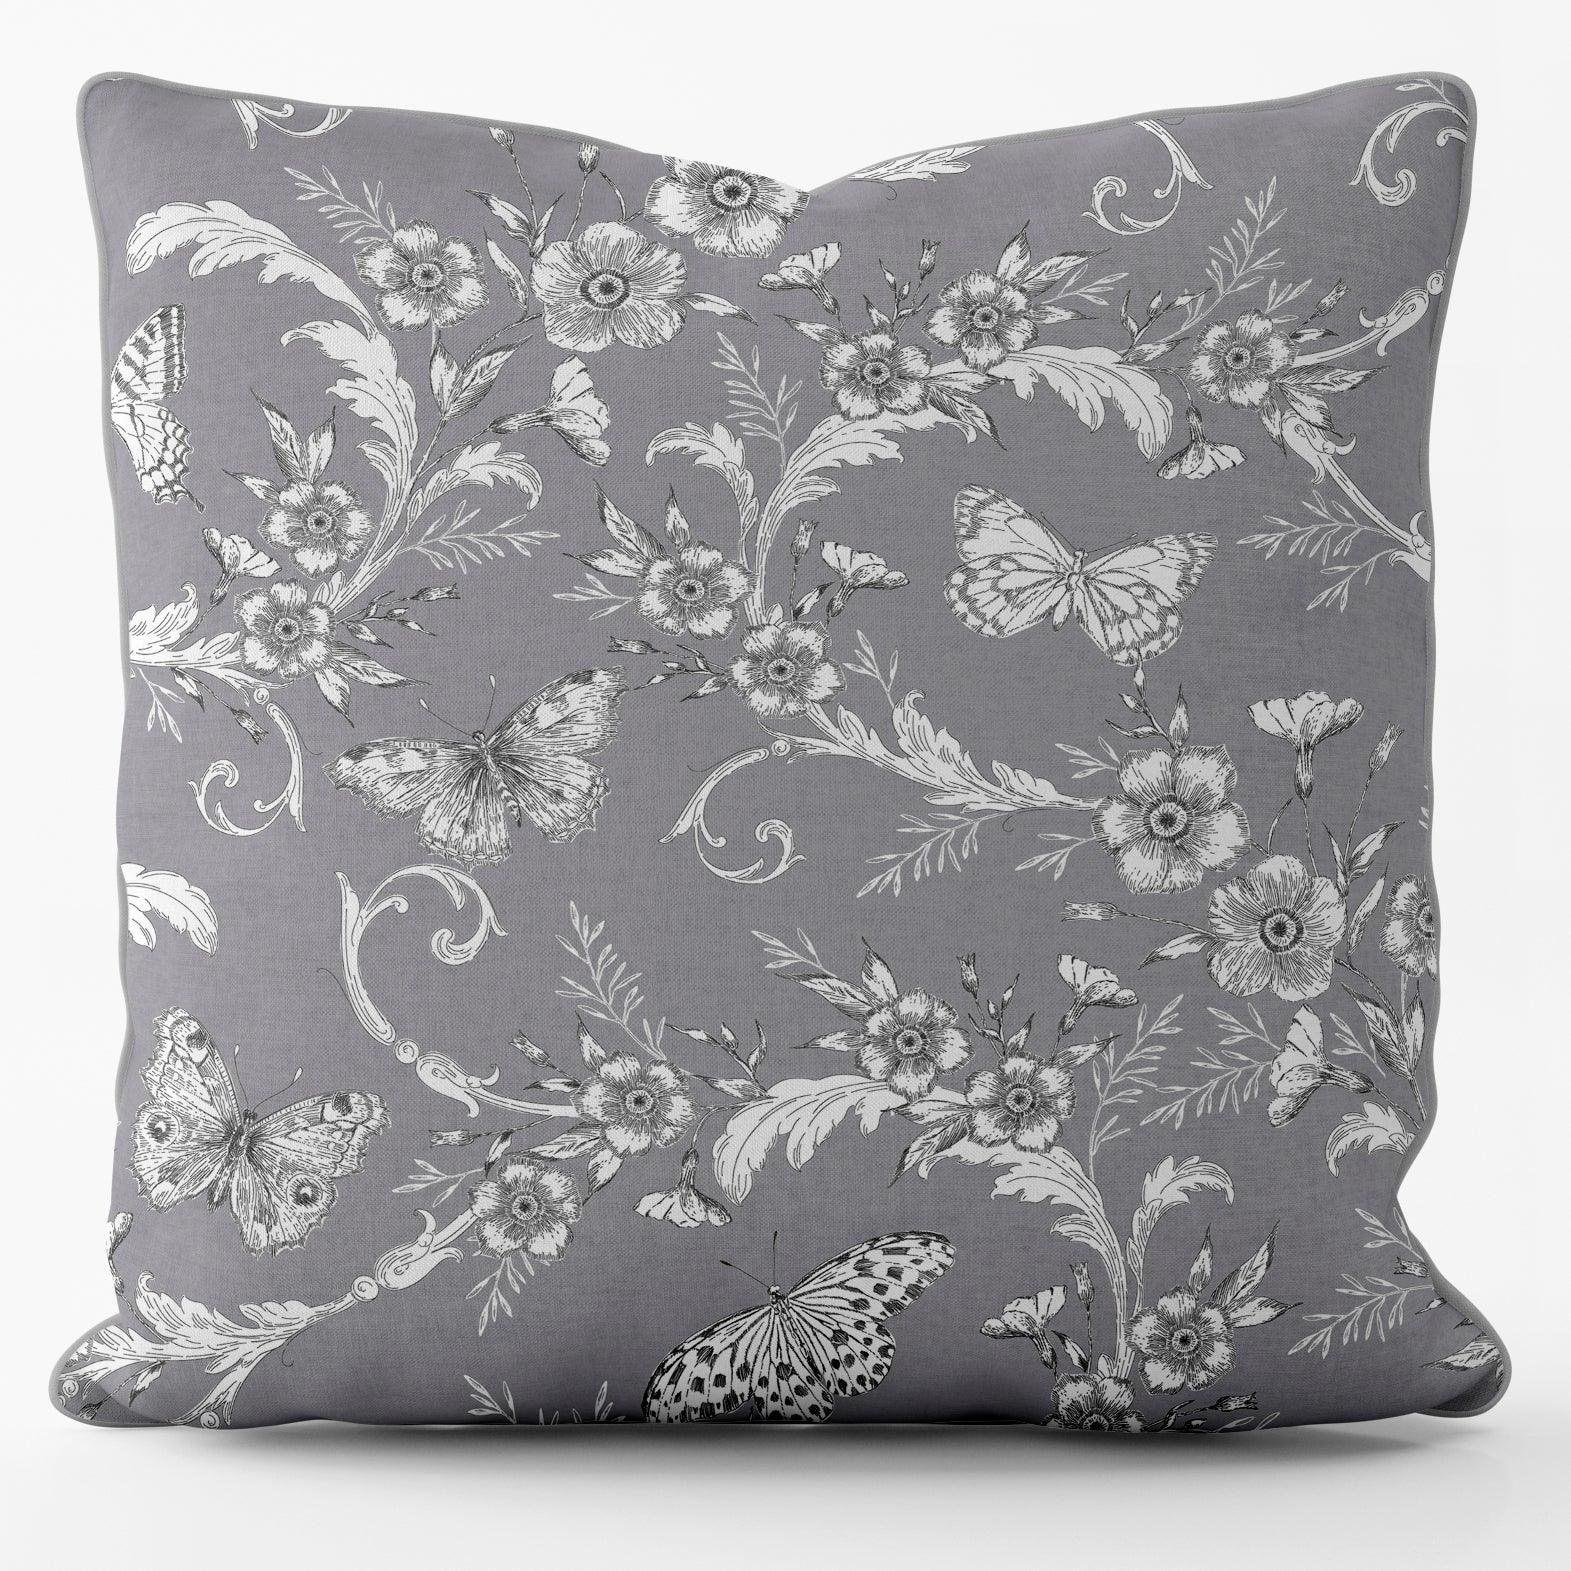 Trailing Butterfly Grey - House Of Turnowsky Cushion